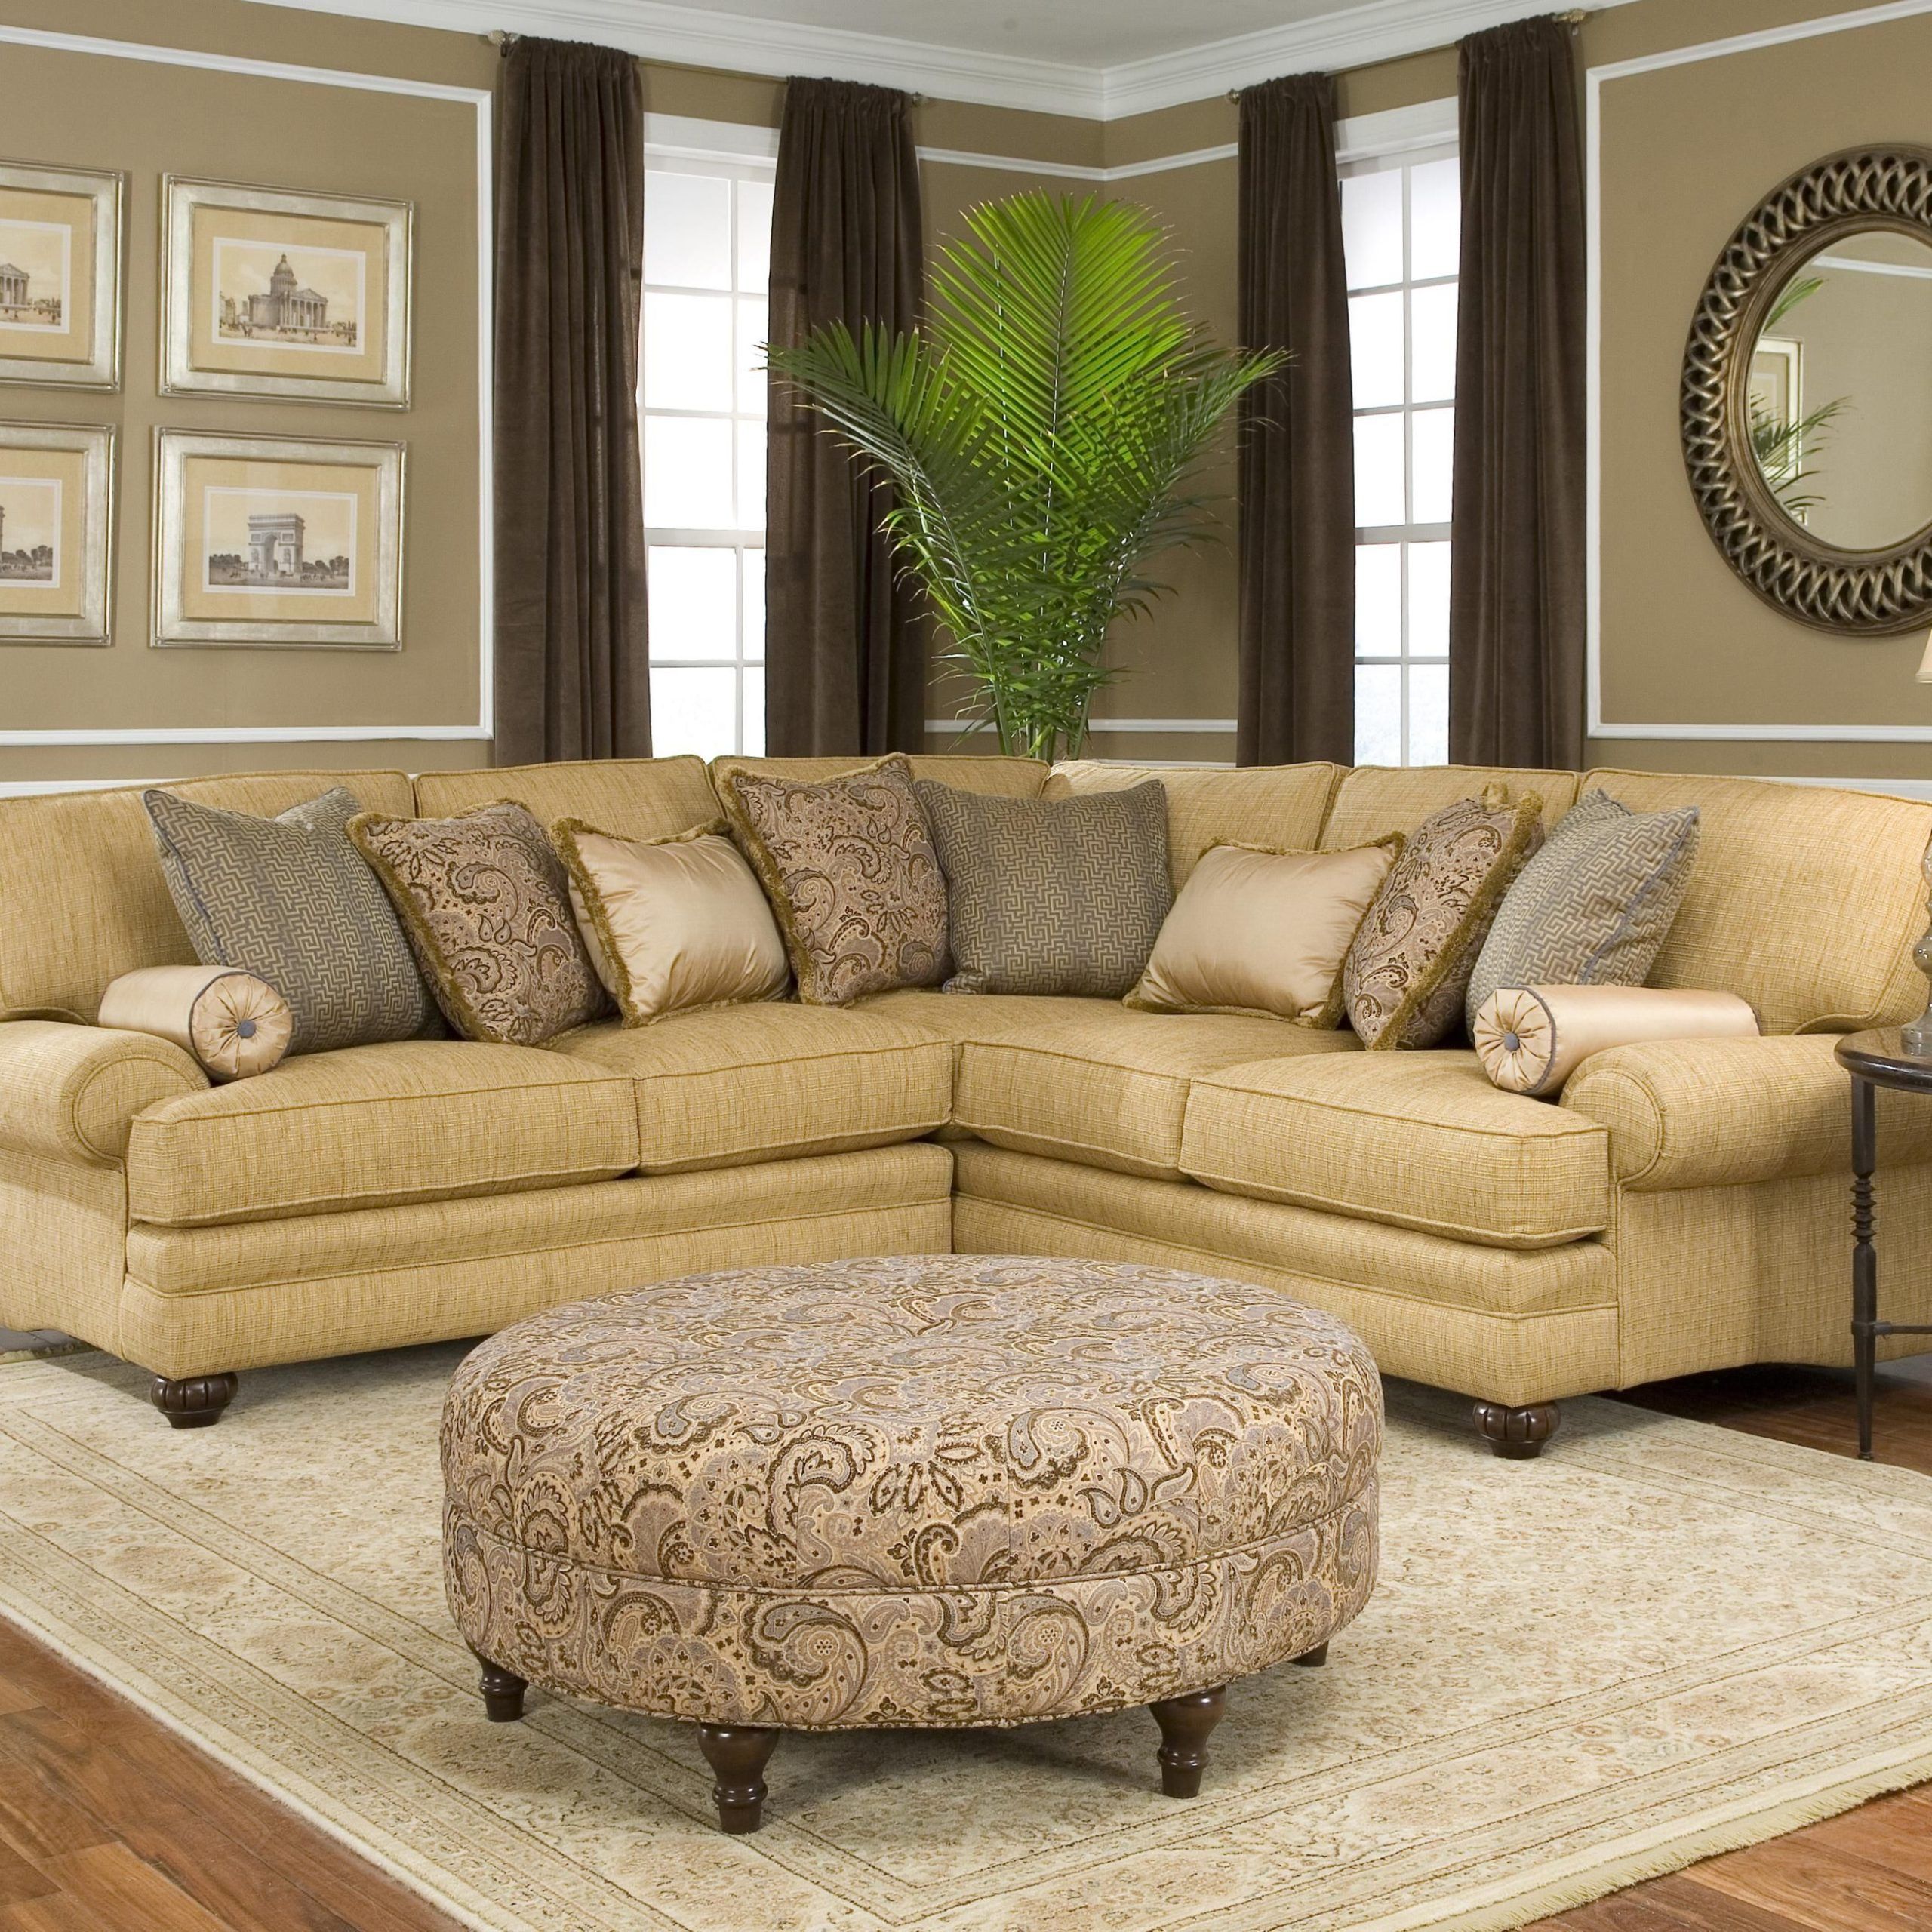 20 Top Traditional Sectional Sofas Living Room Furniture | Sofa Ideas Pertaining To Sofas For Living Rooms (View 4 of 20)